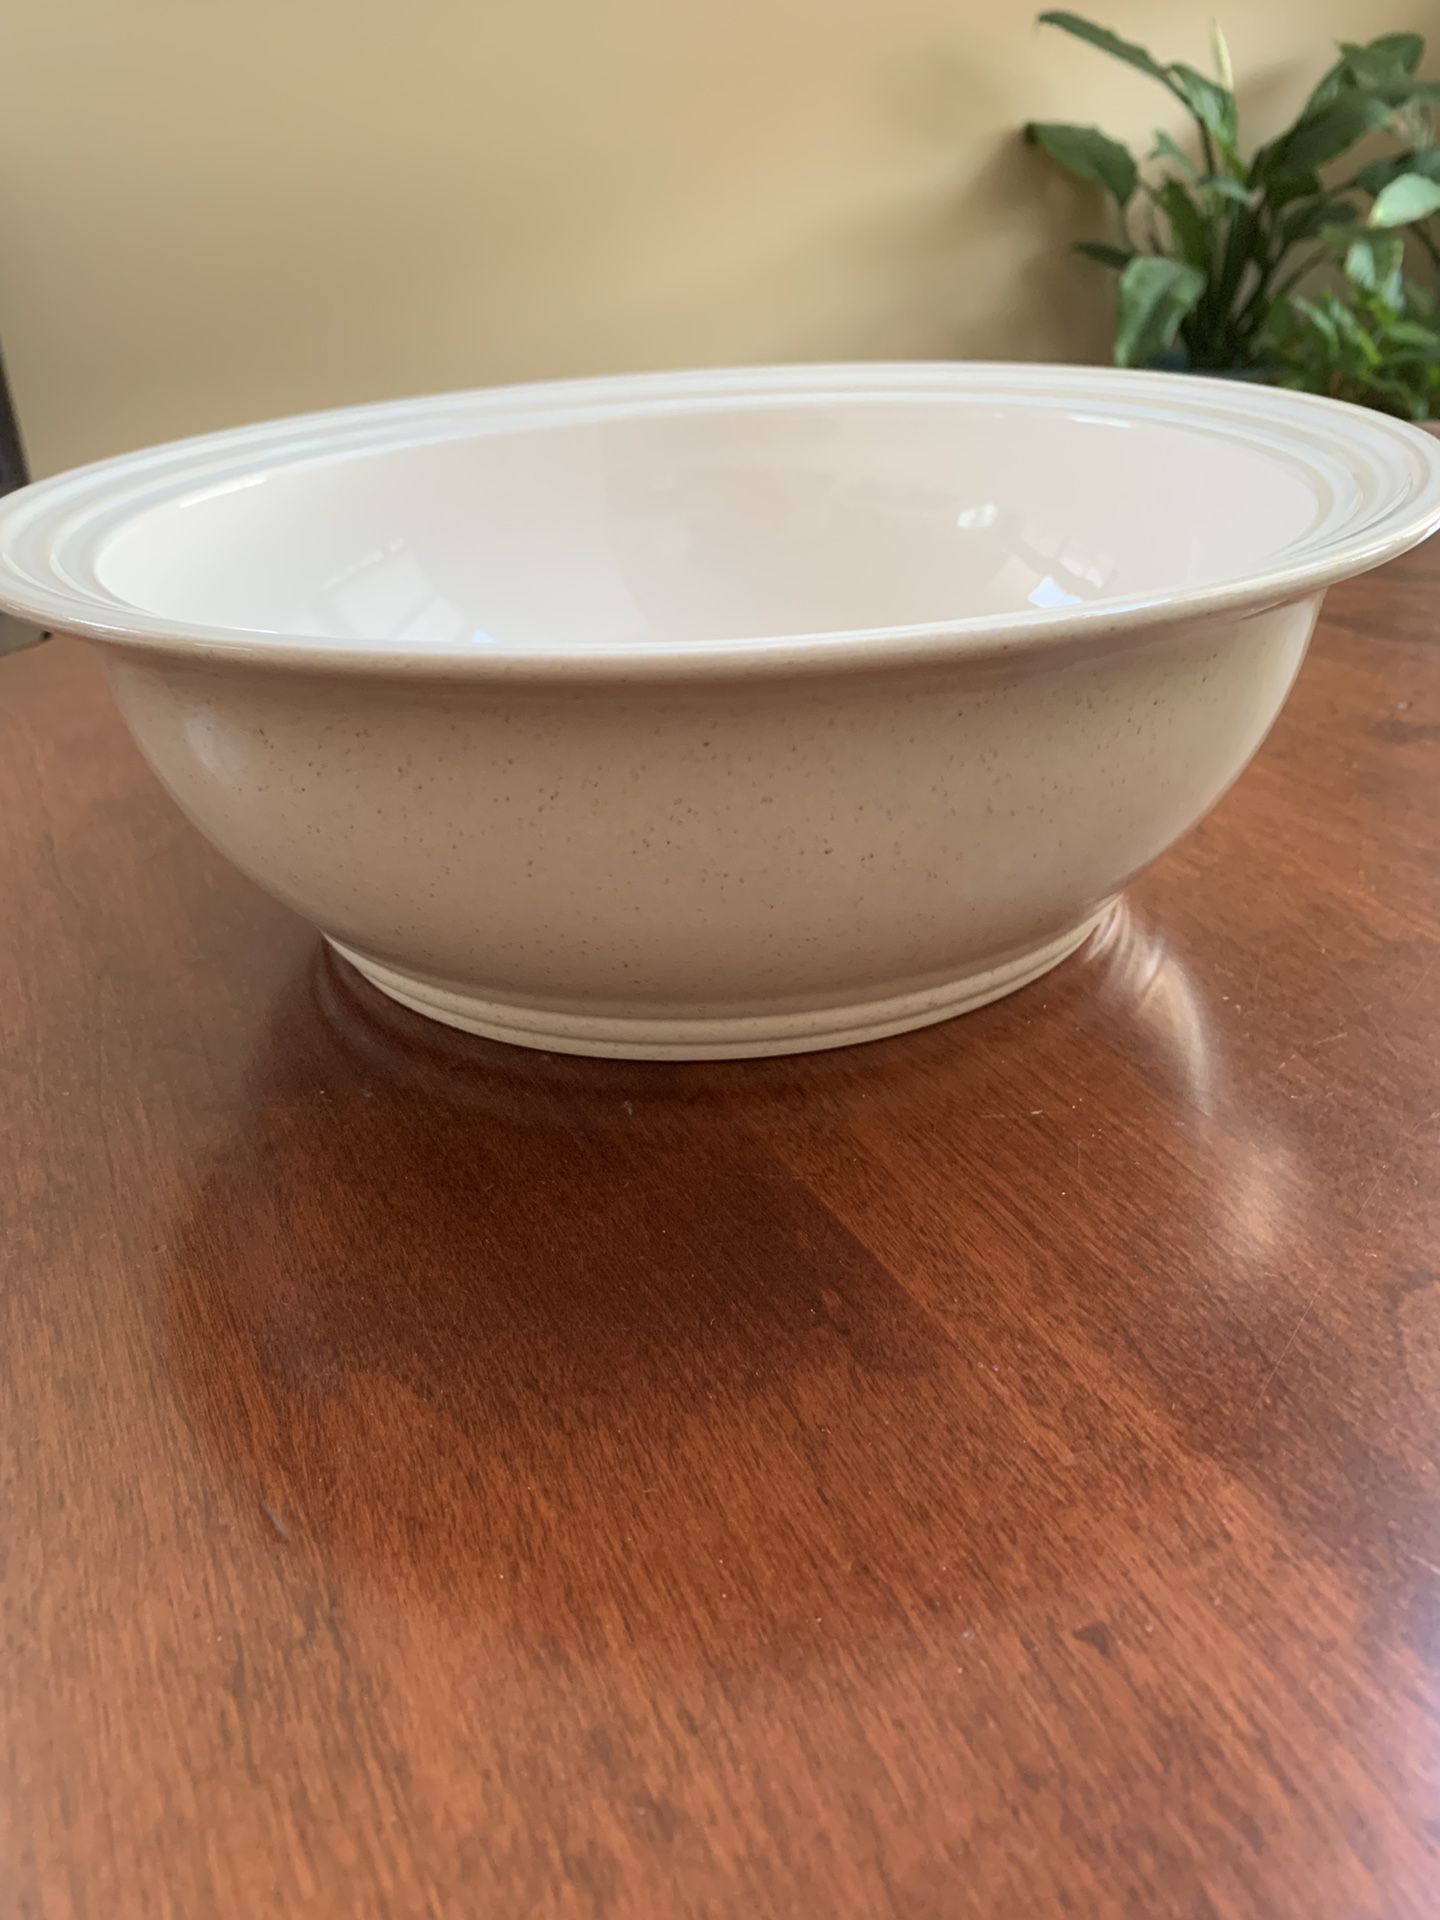 PFALTZGRAFF - CAPPUCCINO - 11" LARGE SERVING BOWL - NEW Never used. Mint.